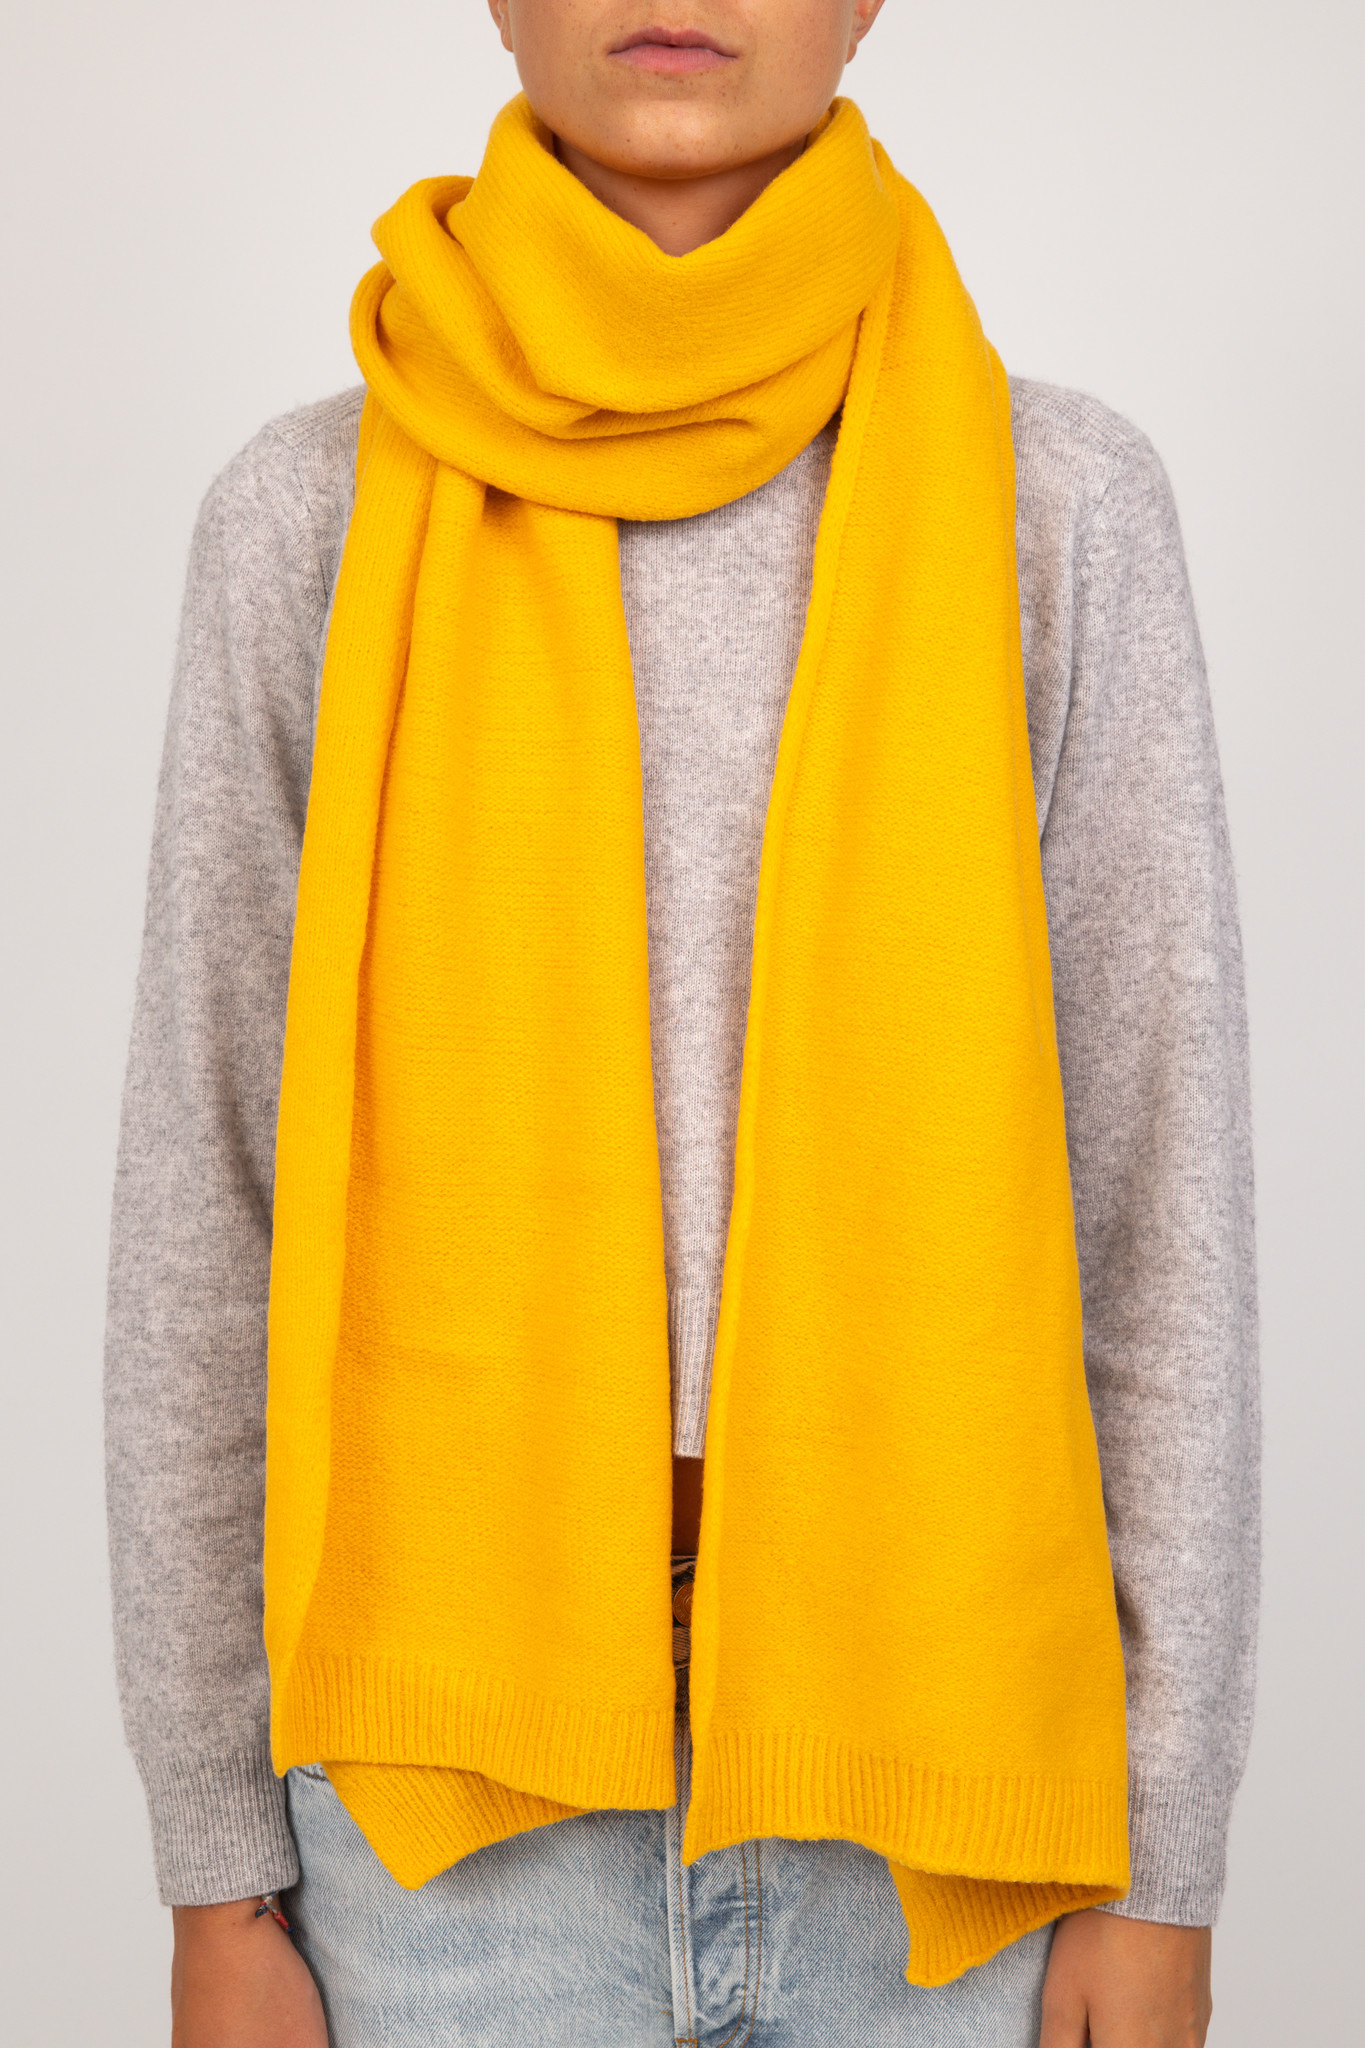 JEFF SCARF IN YELLOW-2